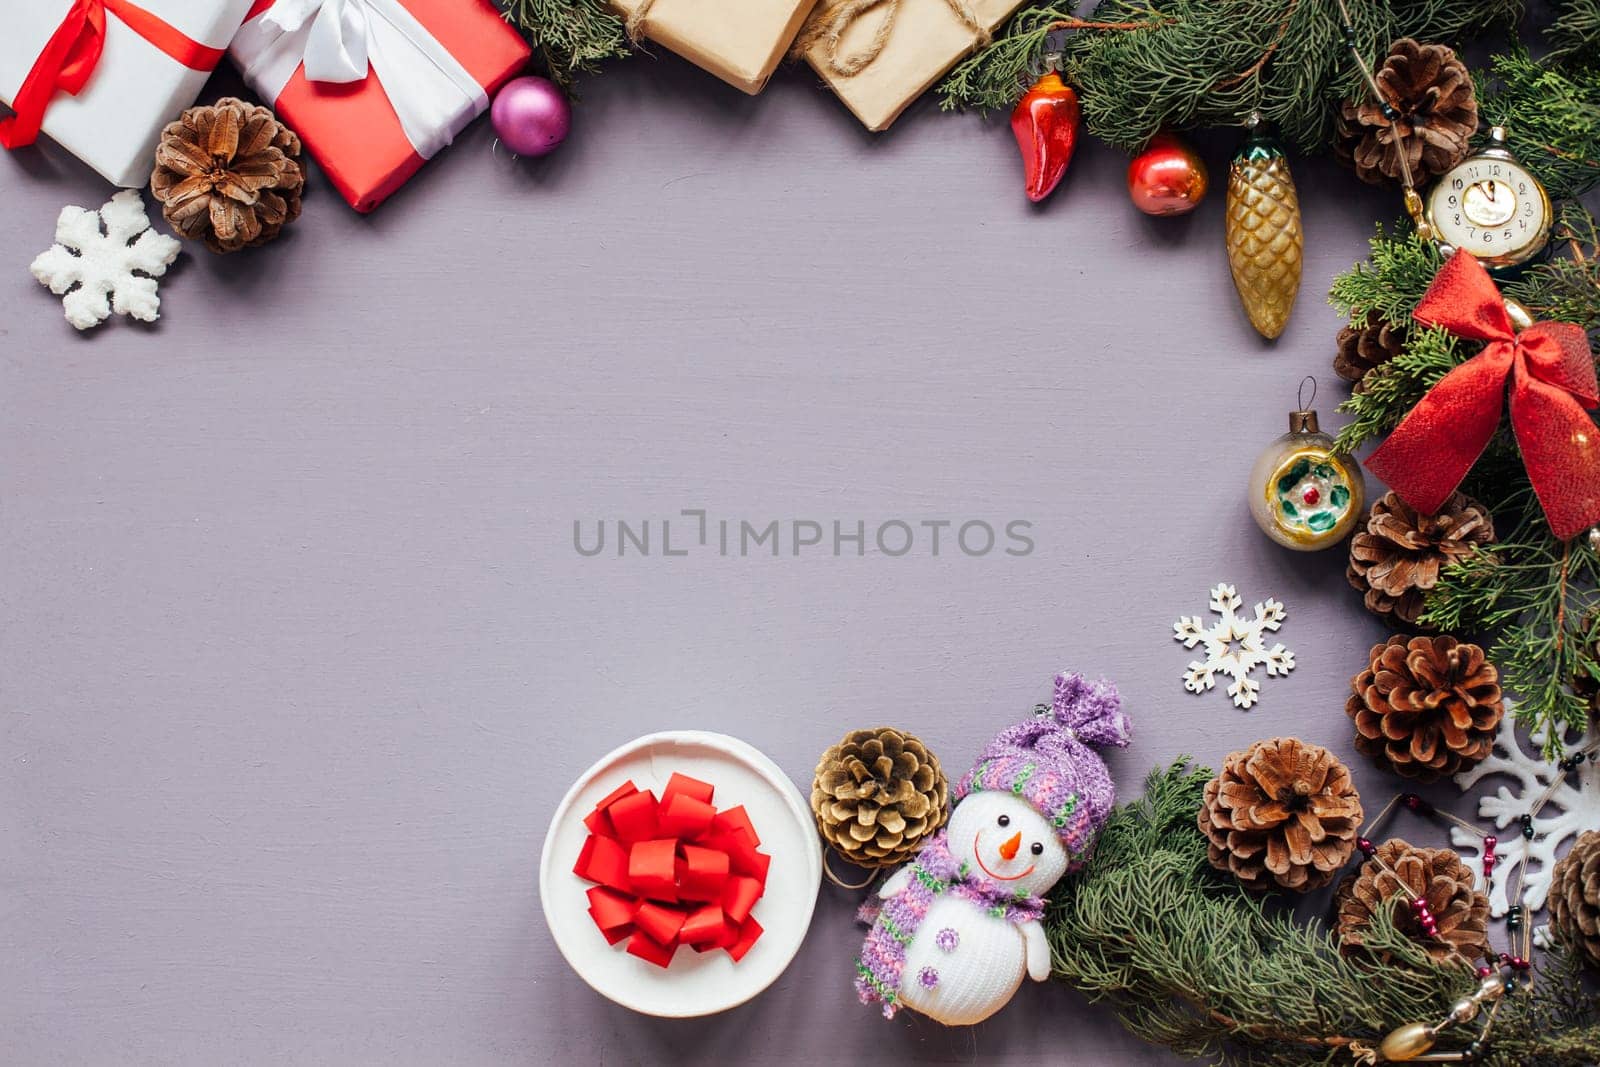 Christmas toys festive gifts decor new year on a purple background by Simakov